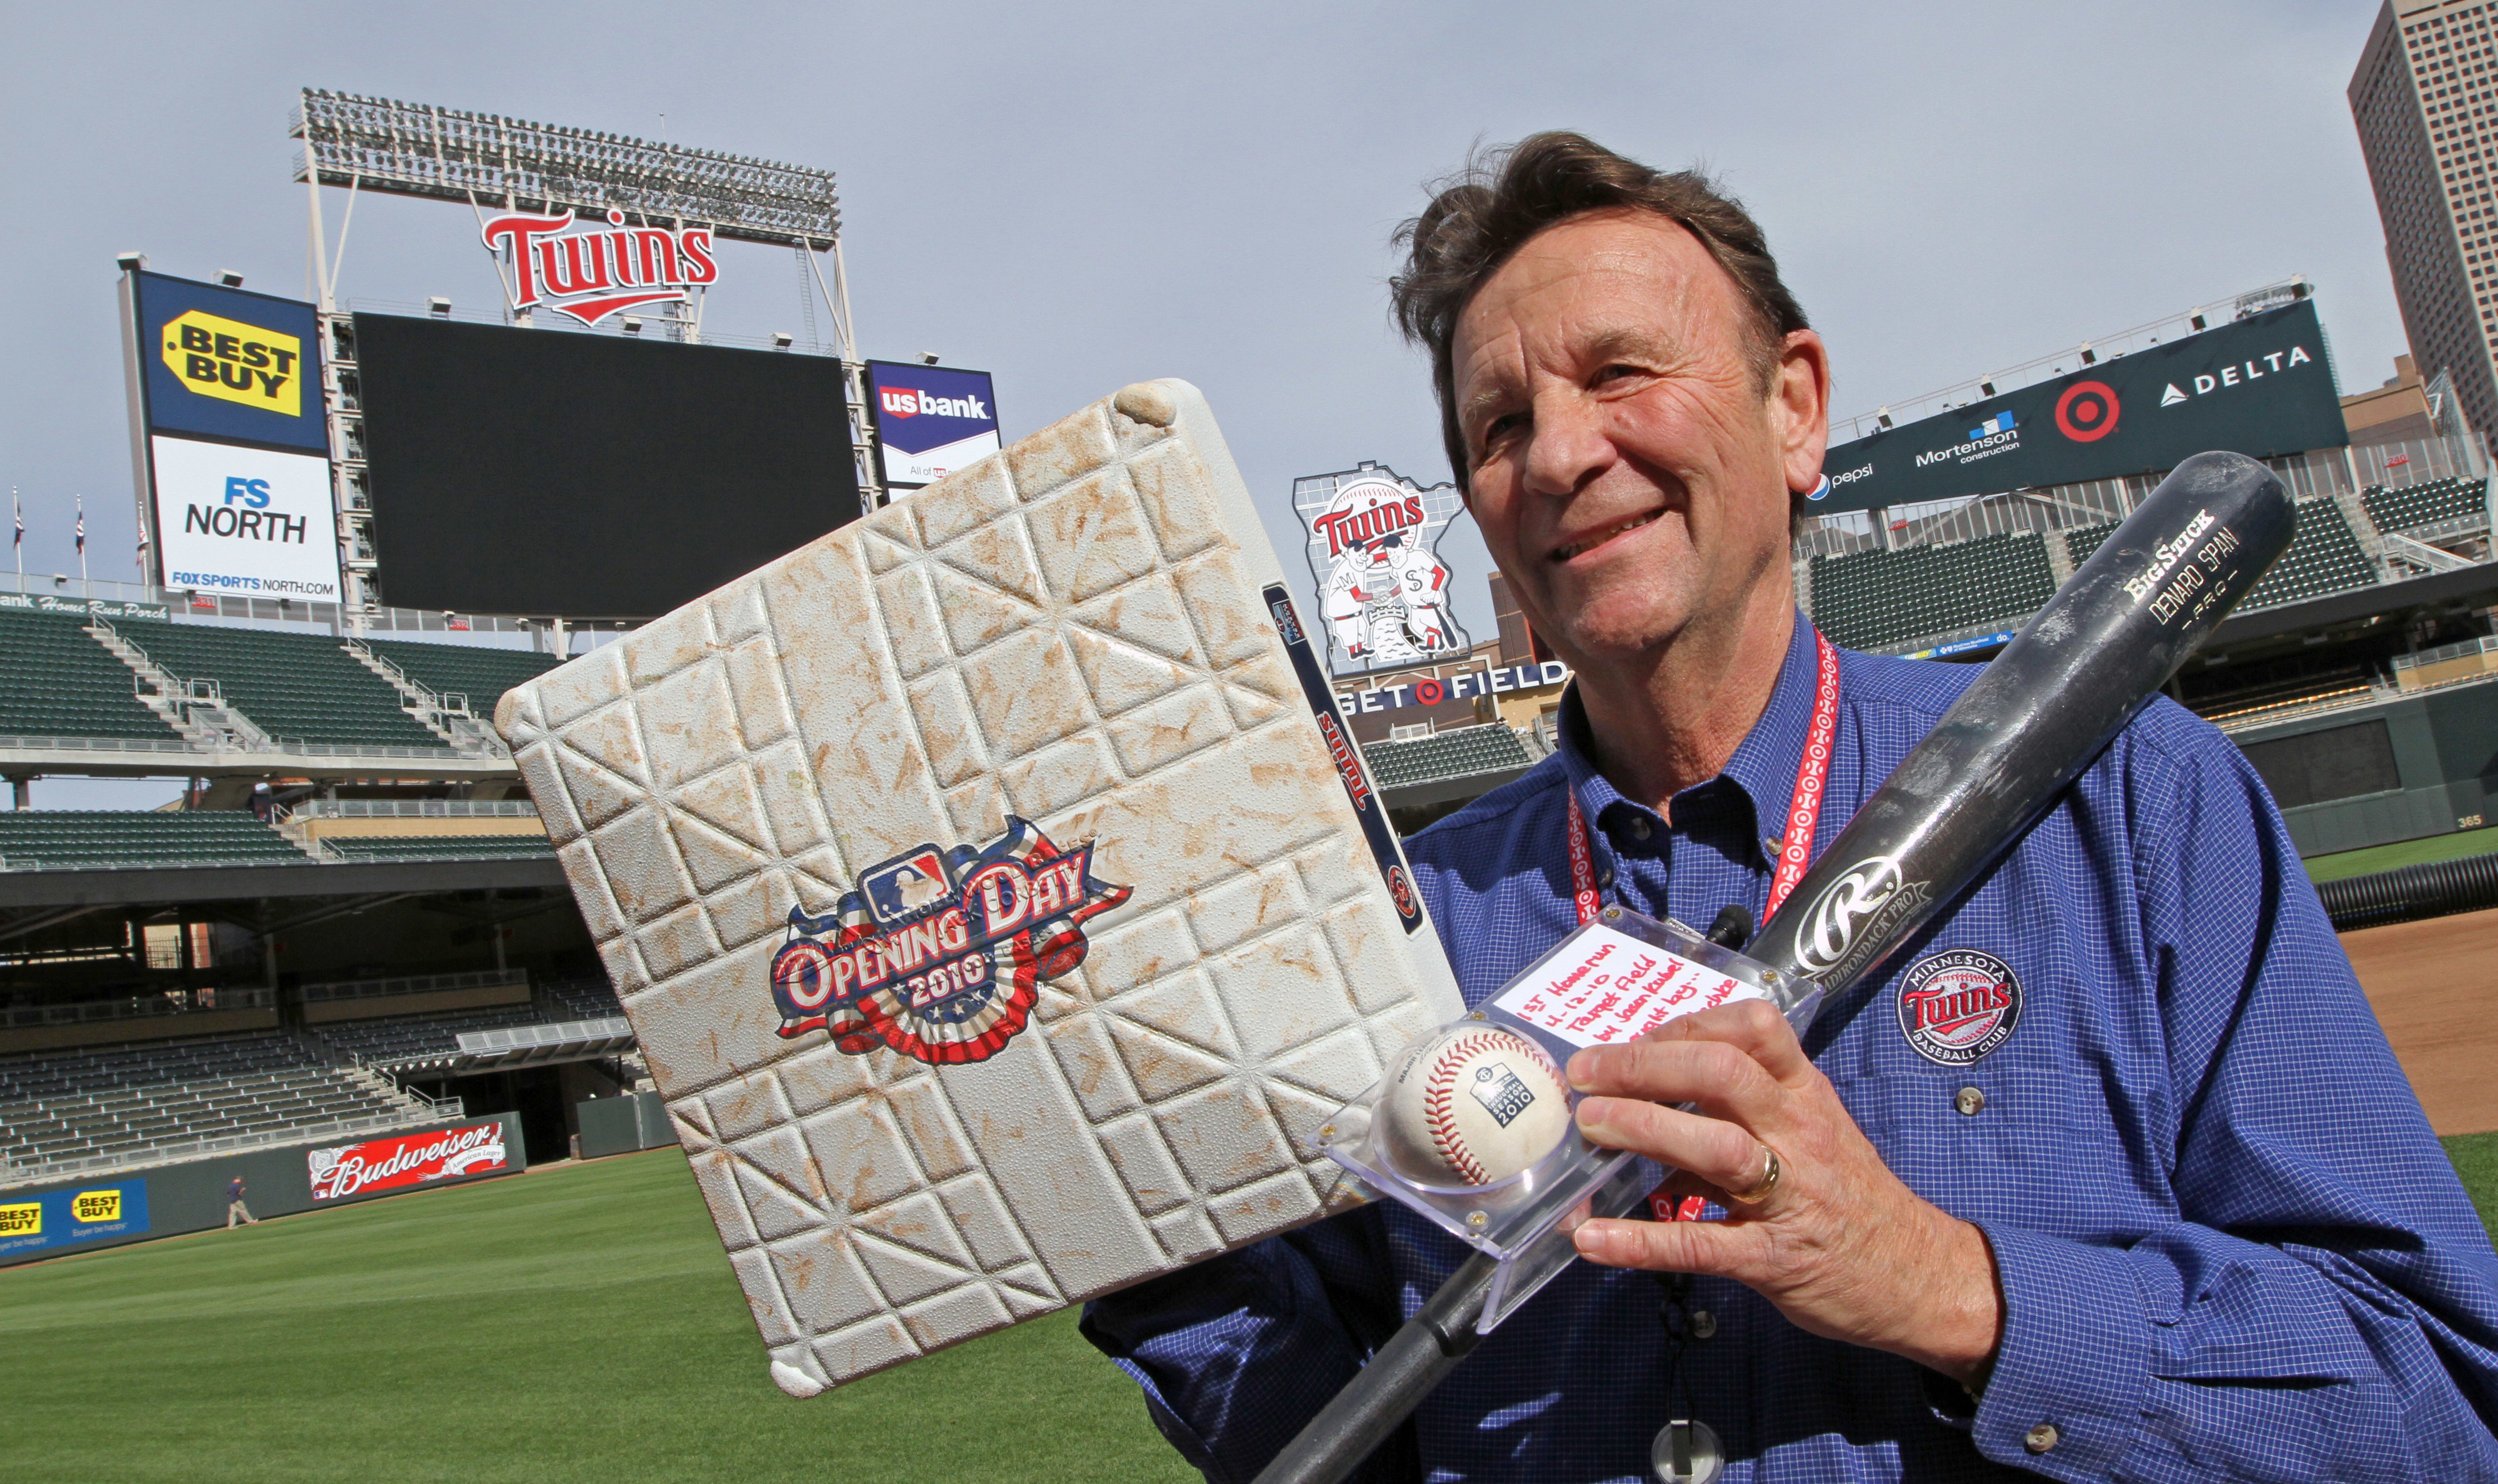 Twins Team Curator Clyde Doepner held first base from the Twins opener in 2010, the ball hit by Jason Kubel for the first regular season home run and the bat used by Denard Span to hit a home run